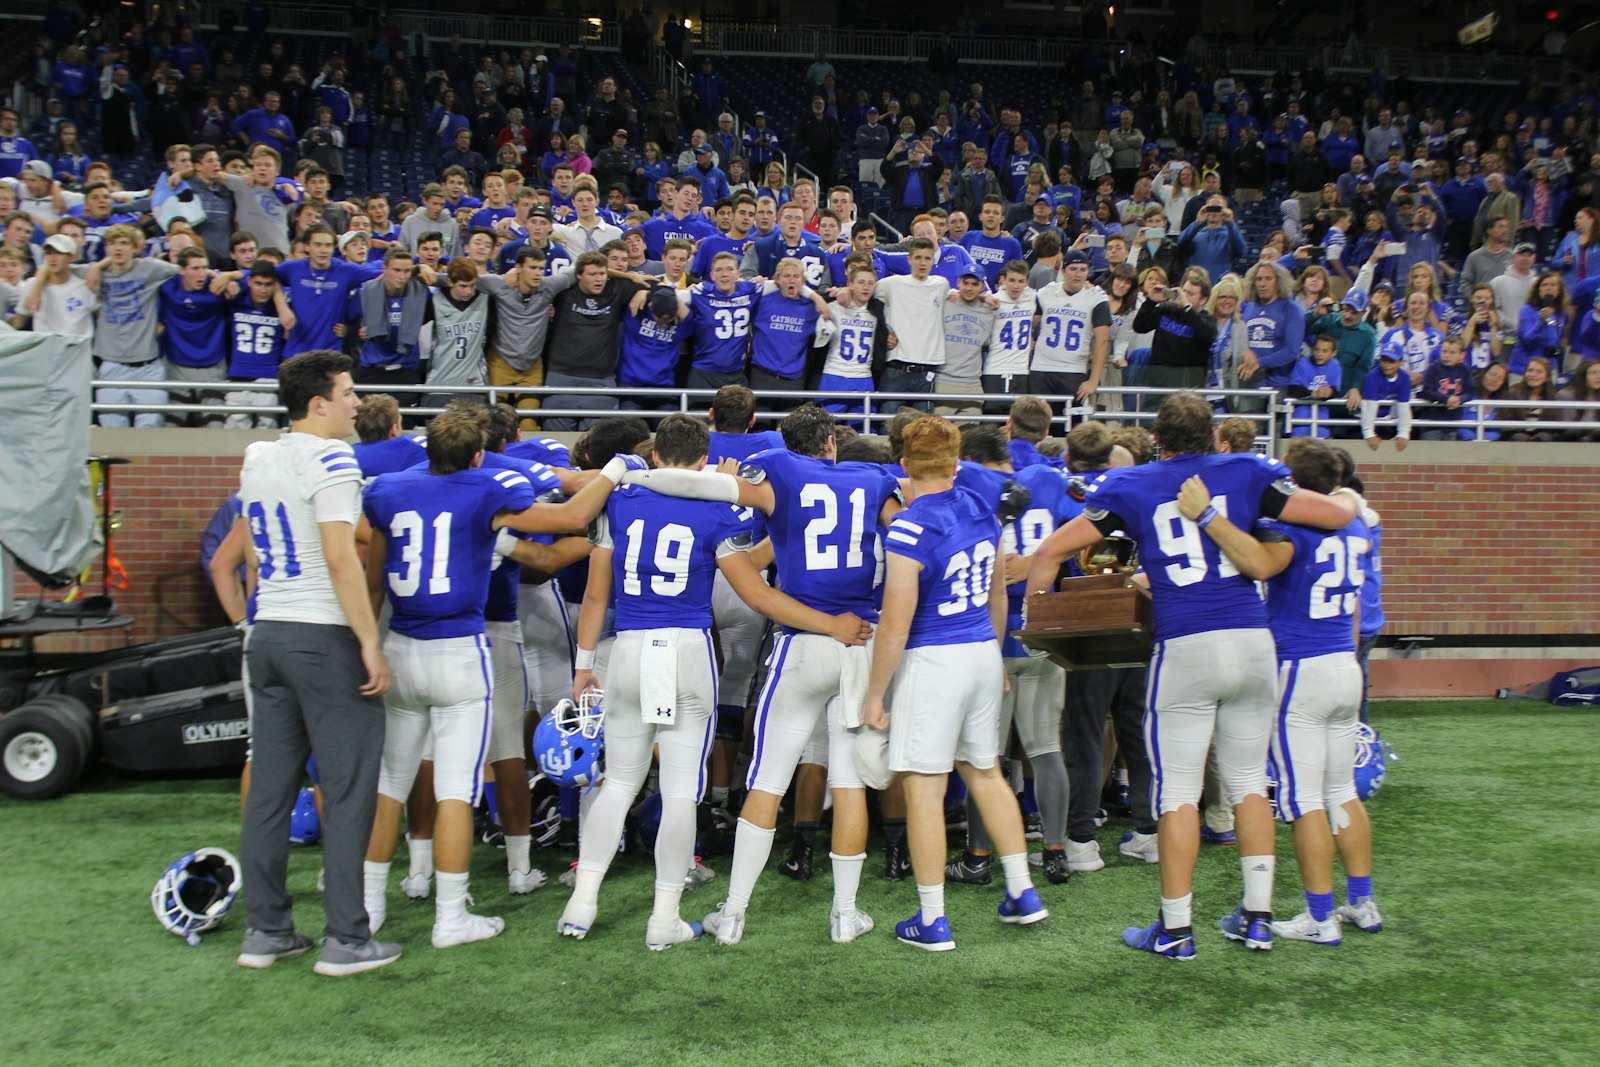 Detroit Catholic Central was the last team before Warren De La Salle to win the Bishop Division championship. Here, the team celebrates a victory over Orchard Lake St. Mary’s in 2016 at Ford Field.